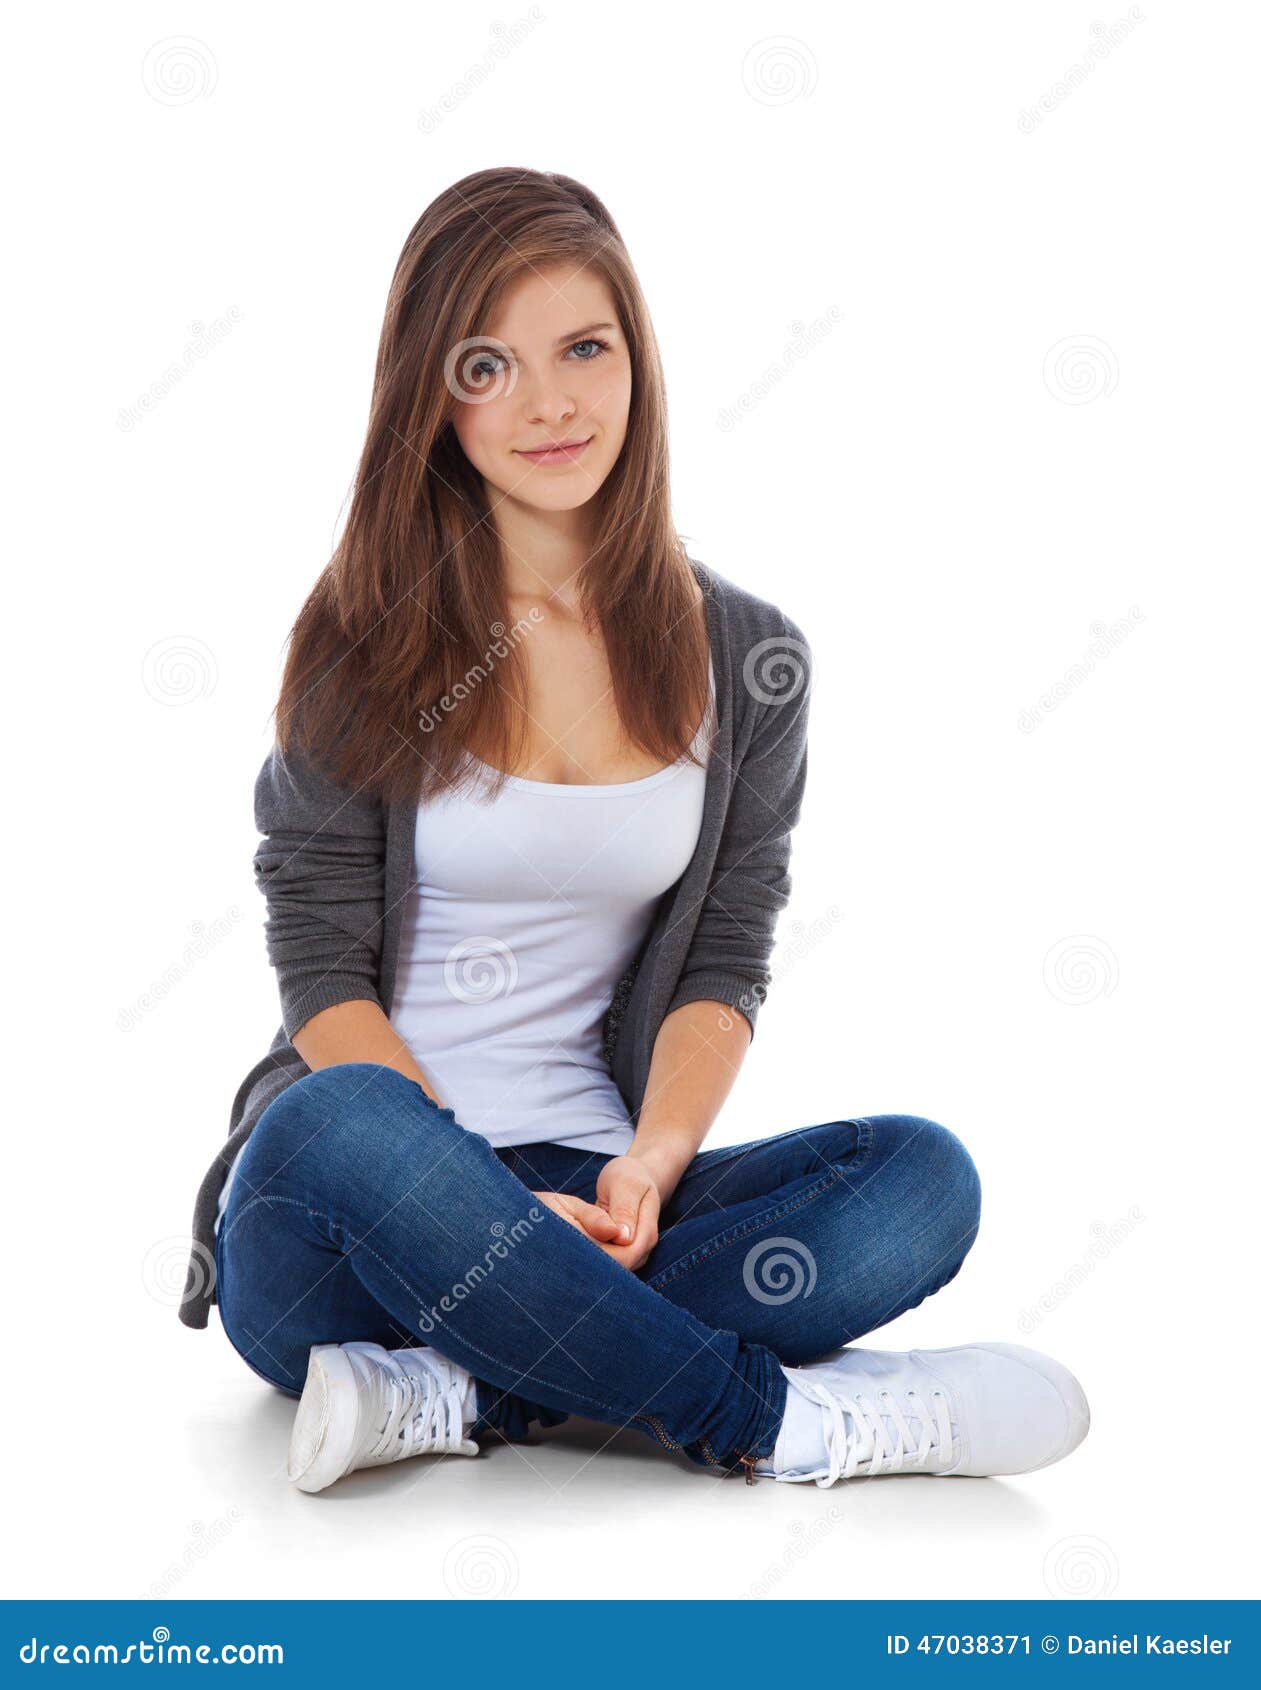 Attractive teenage girl stock image. Image of young, smiling - 47038371